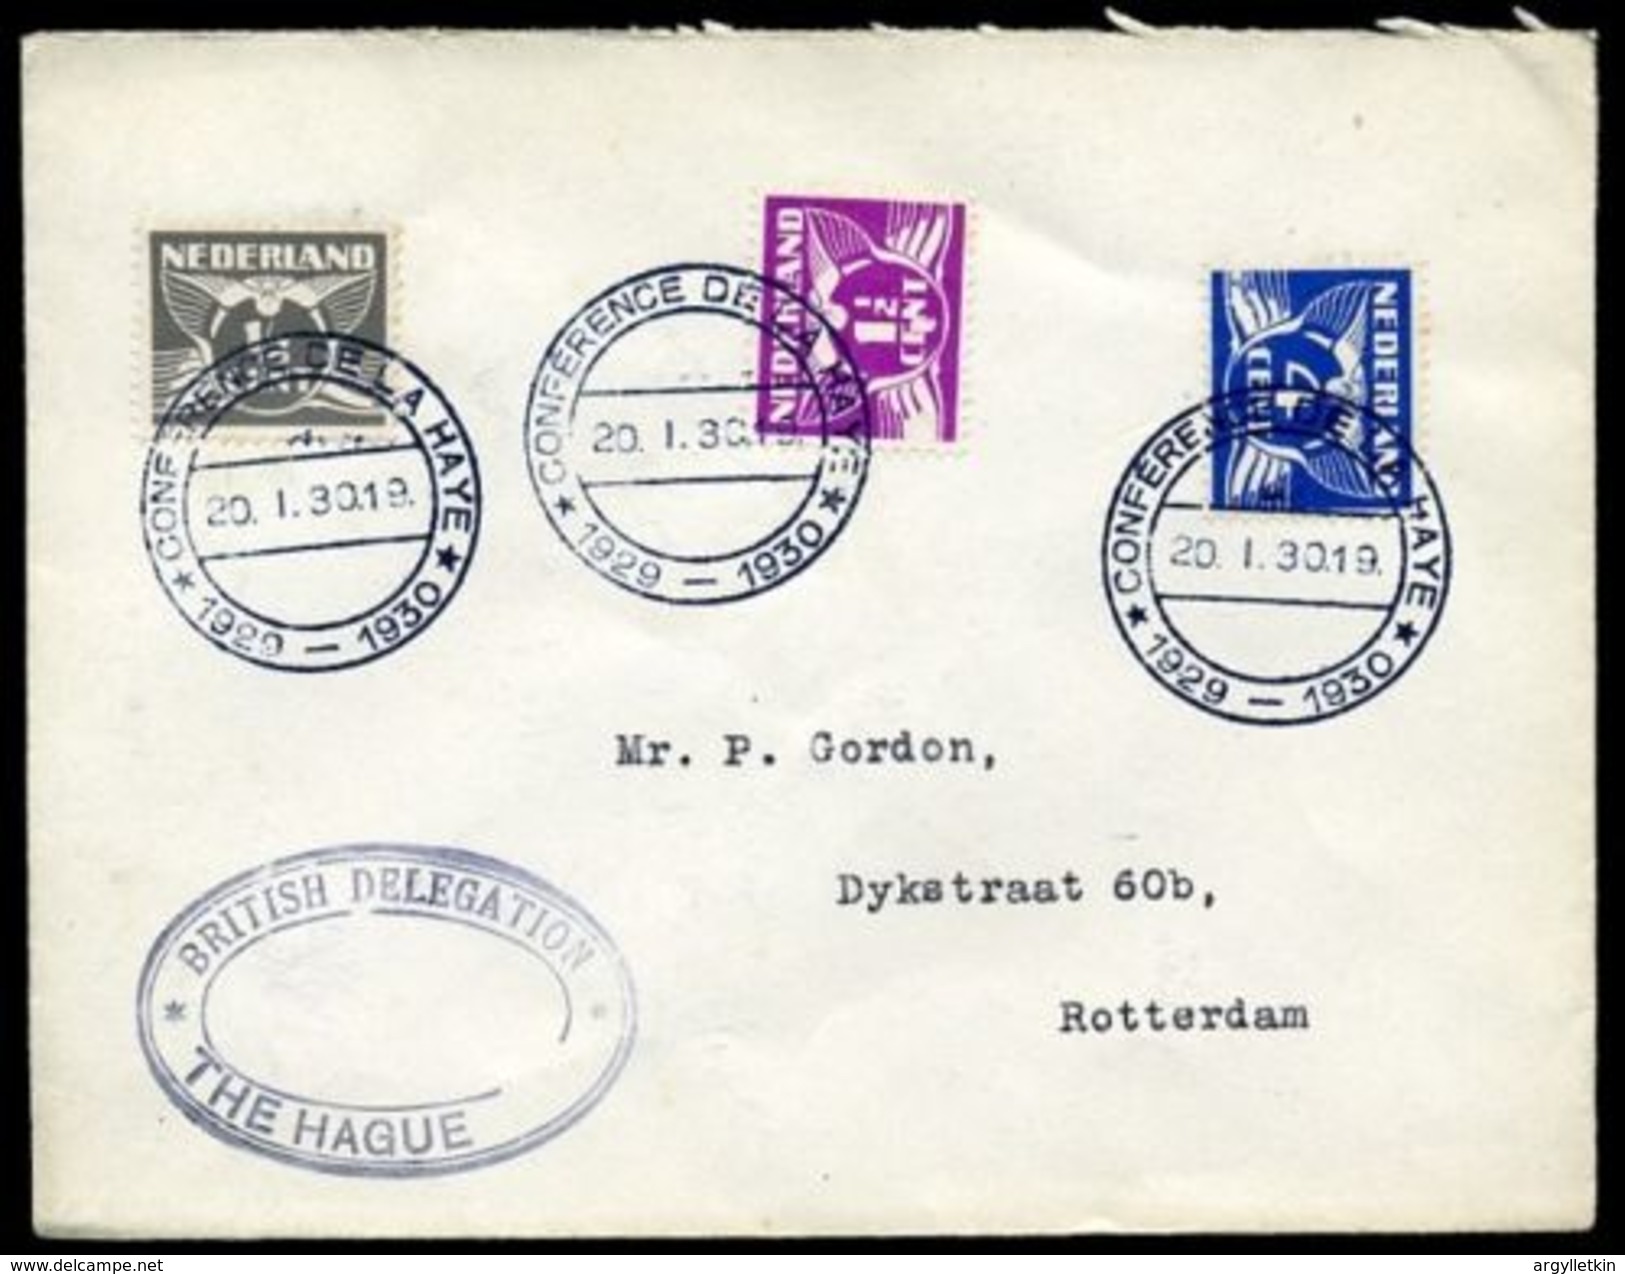 GERMANY WW1 REPARATIONS CONFERENCE THE HAGUE 1930 - Postmark Collection